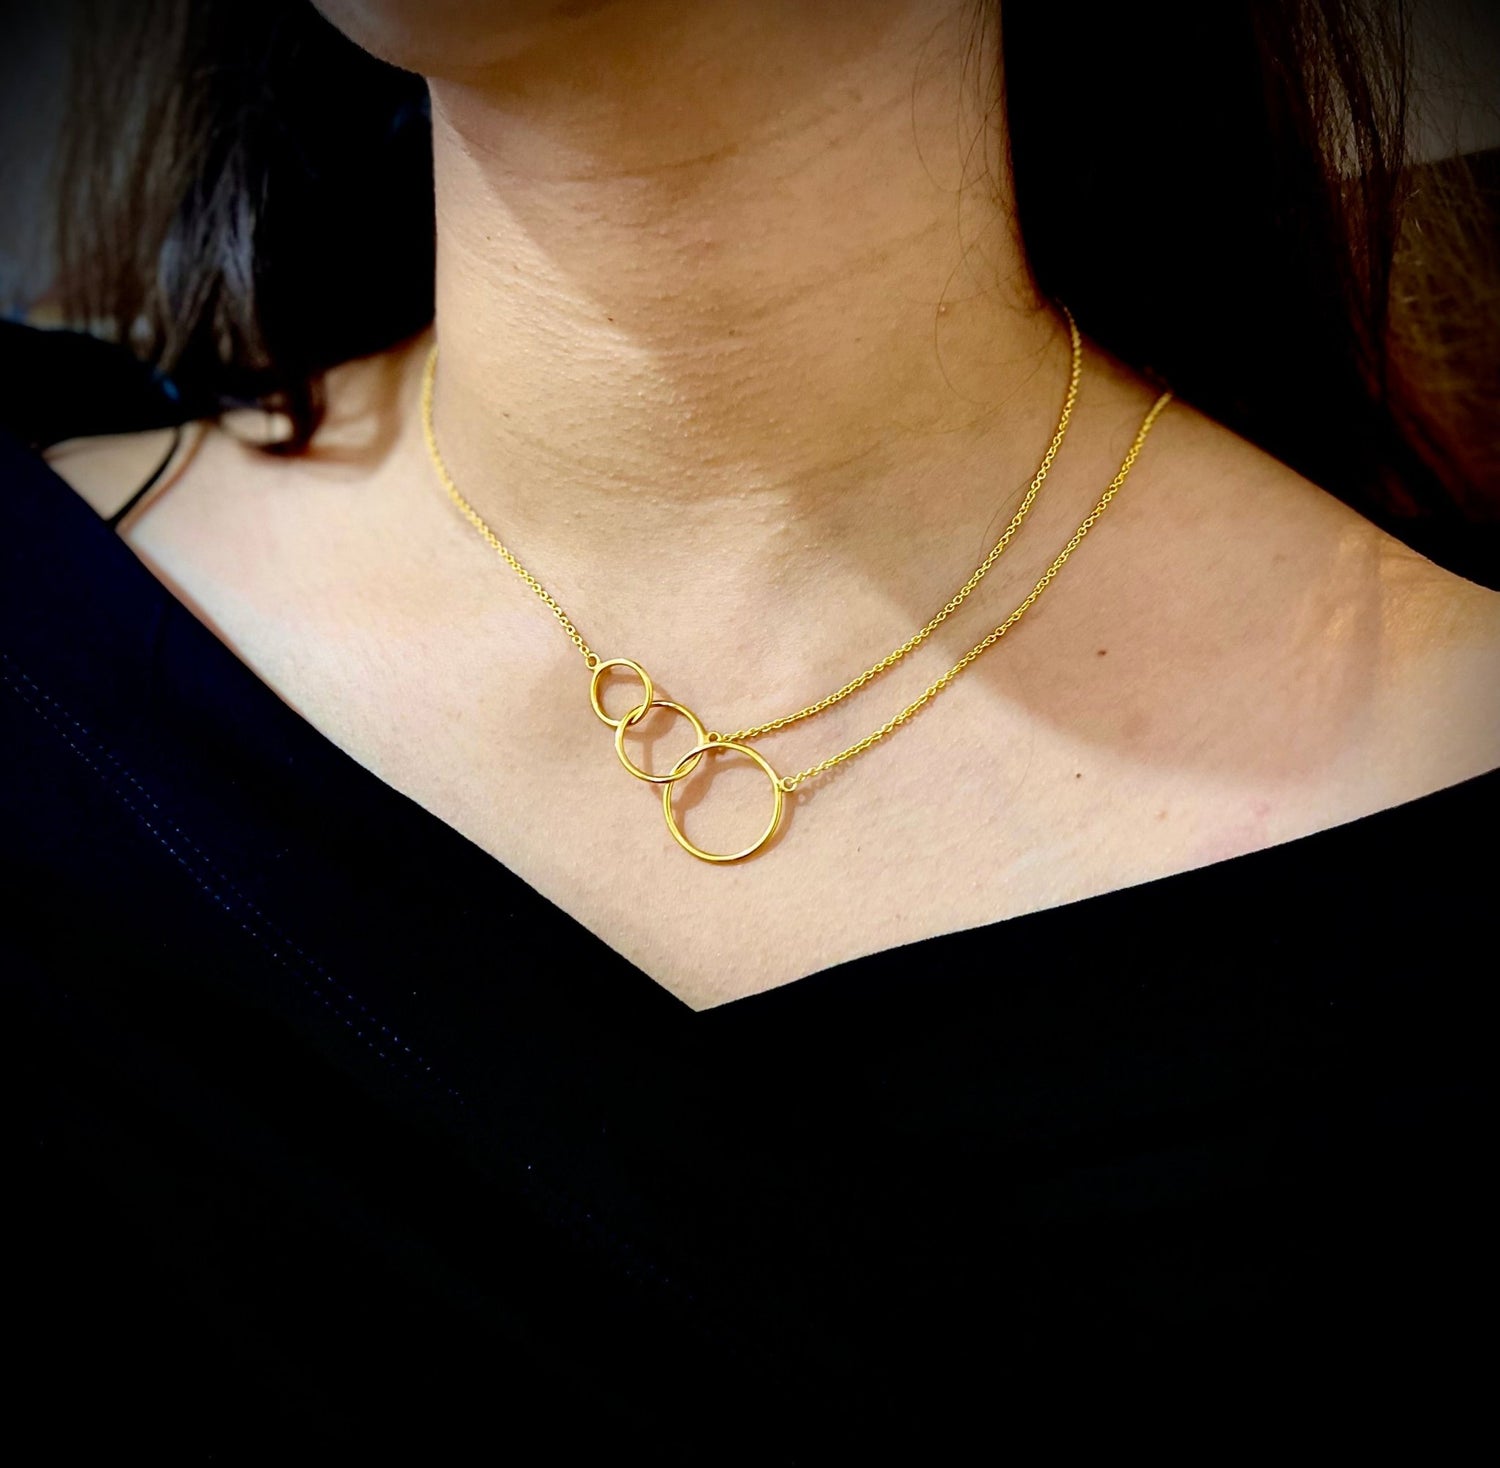 10 Ways to Style a 3 Tier Rings Gold Necklace - Silverings